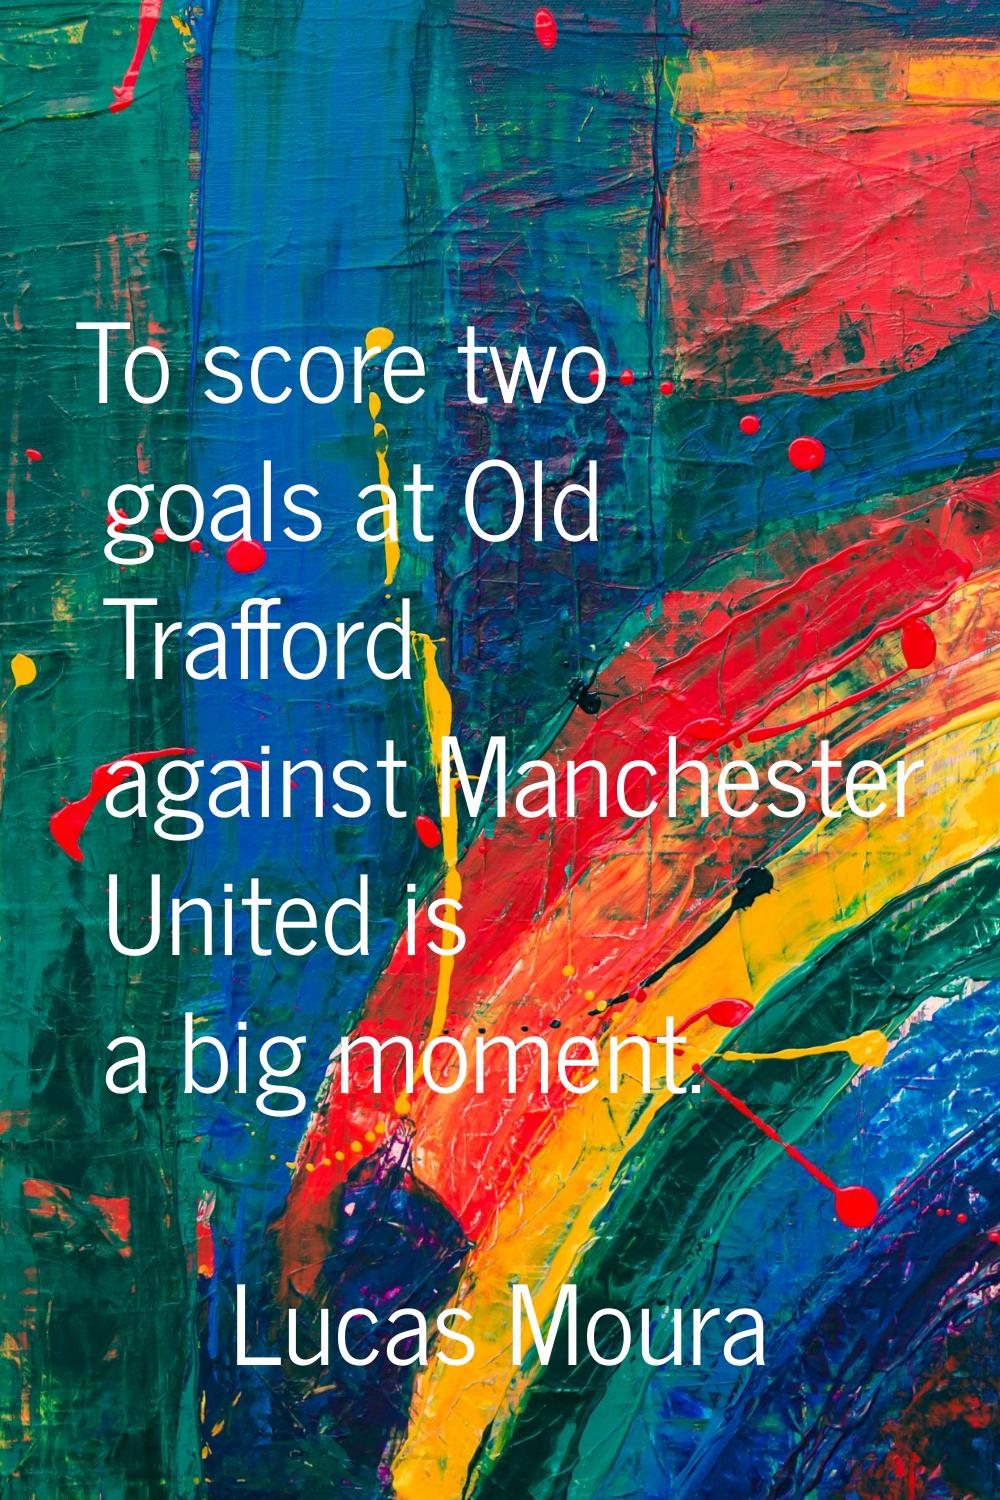 To score two goals at Old Trafford against Manchester United is a big moment.